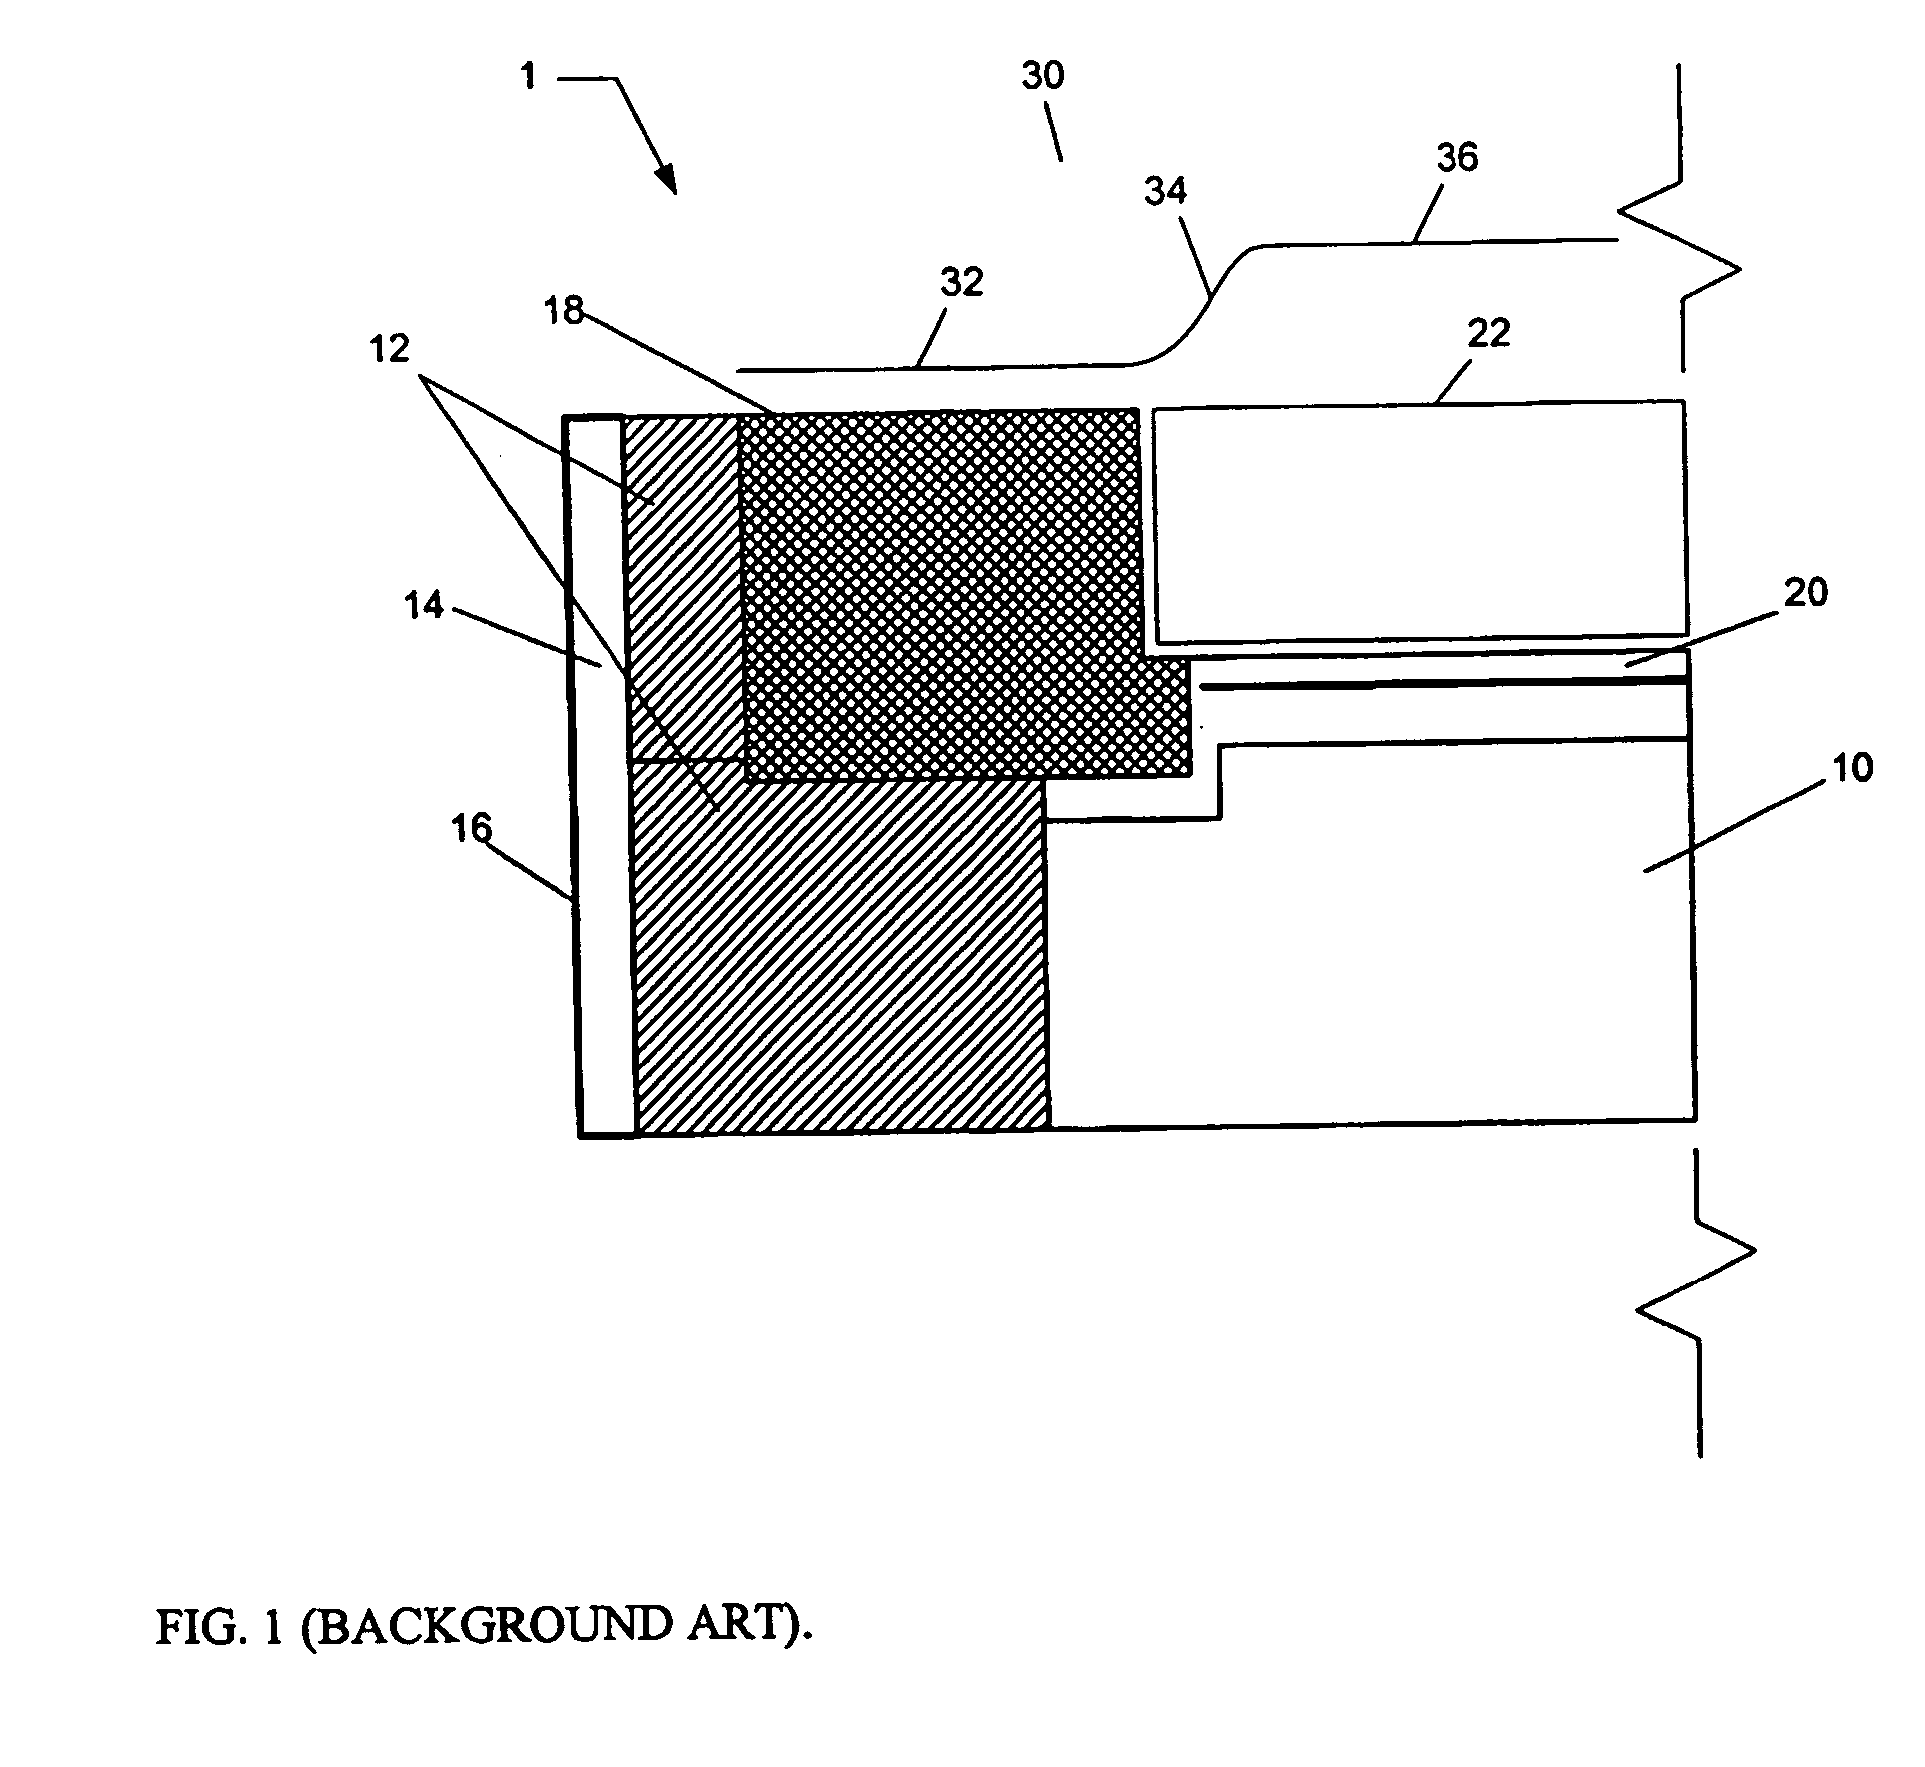 Substrate holder for plasma processing